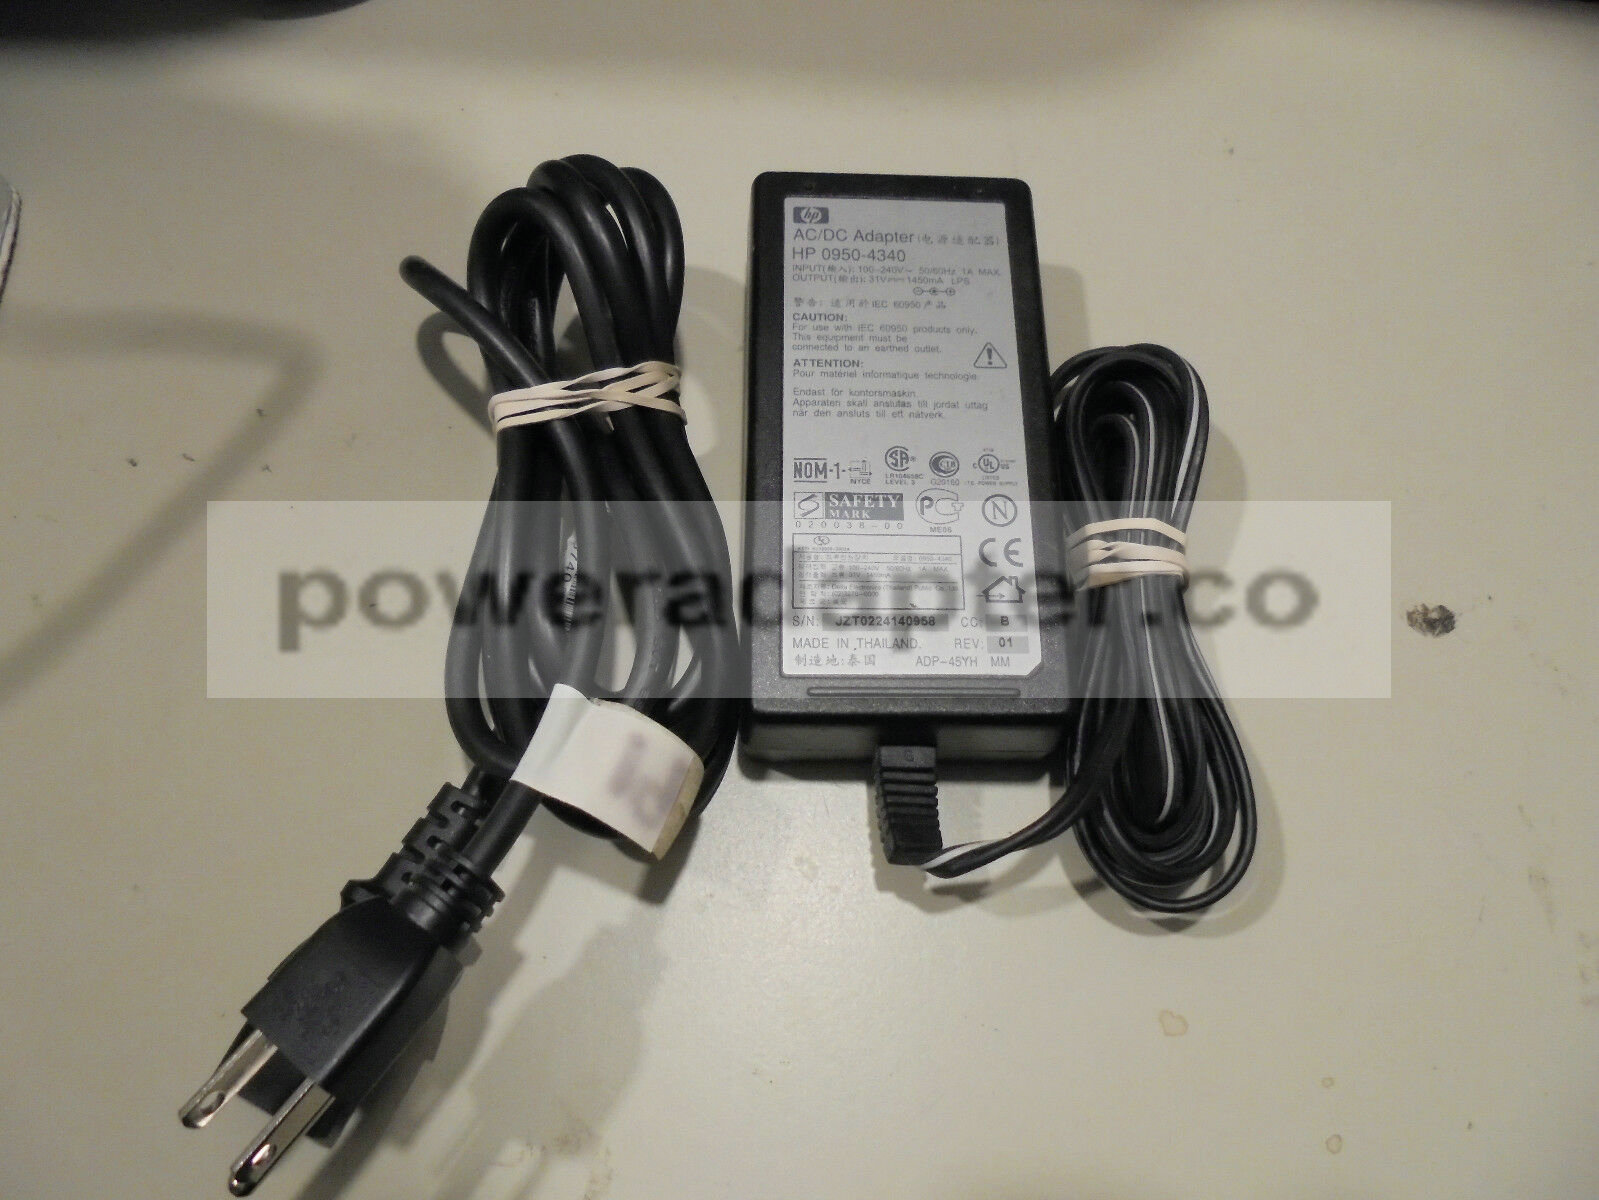 HP 0950-4340 AC-DC Adapter with Power Cord Tested Condition: new Brand: HP MPN: 0950-4340